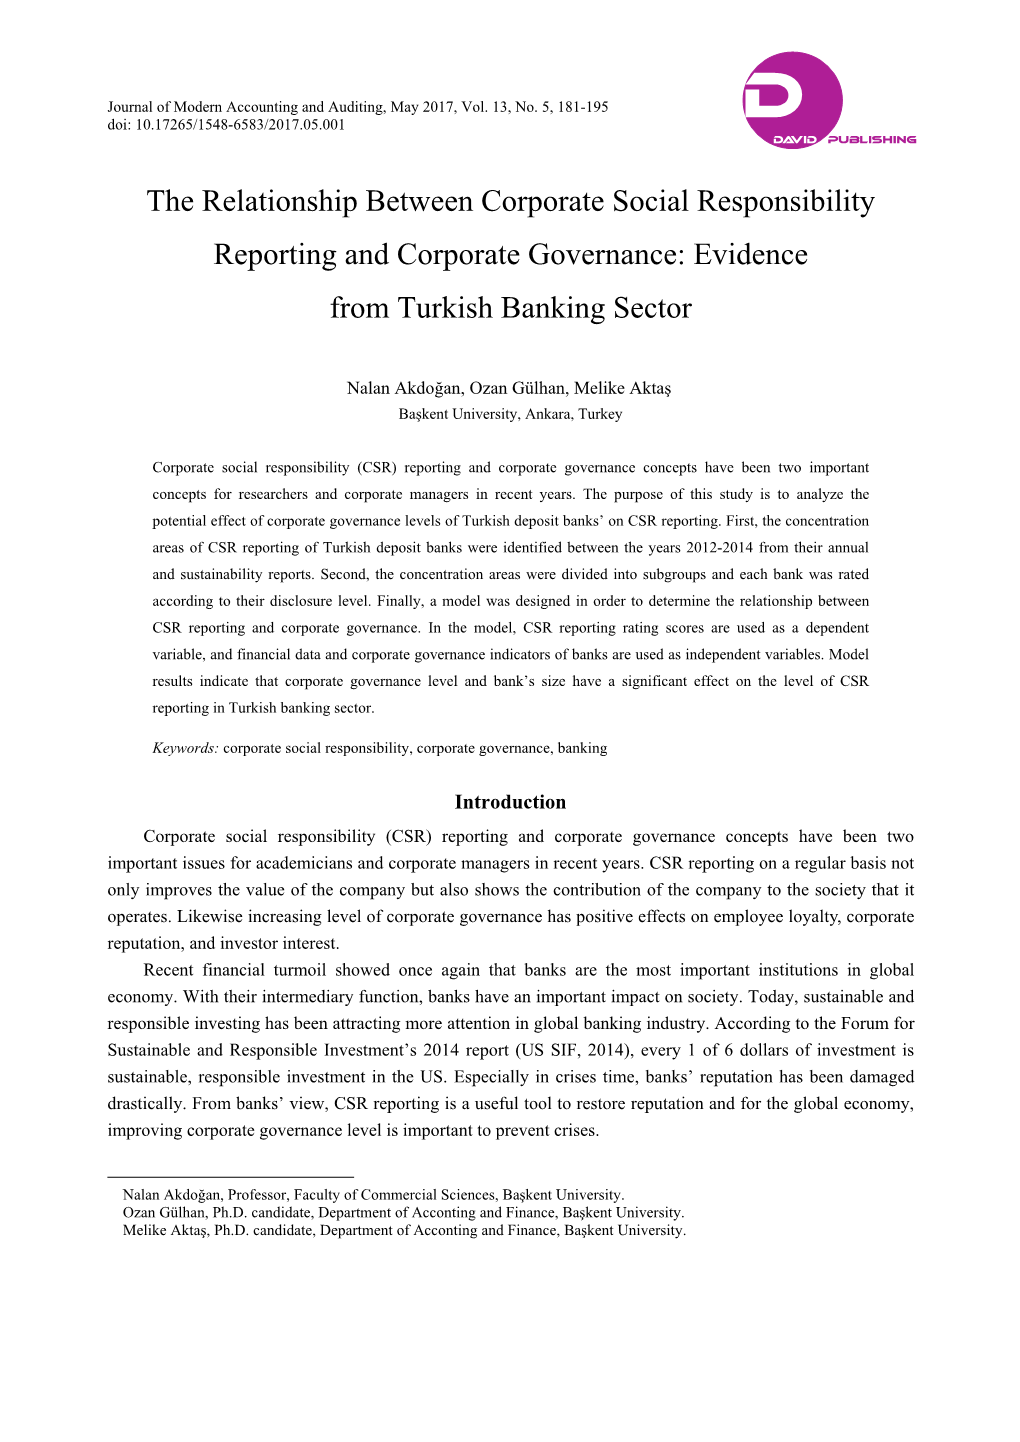 The Relationship Between Corporate Social Responsibility Reporting and Corporate Governance: Evidence from Turkish Banking Sector